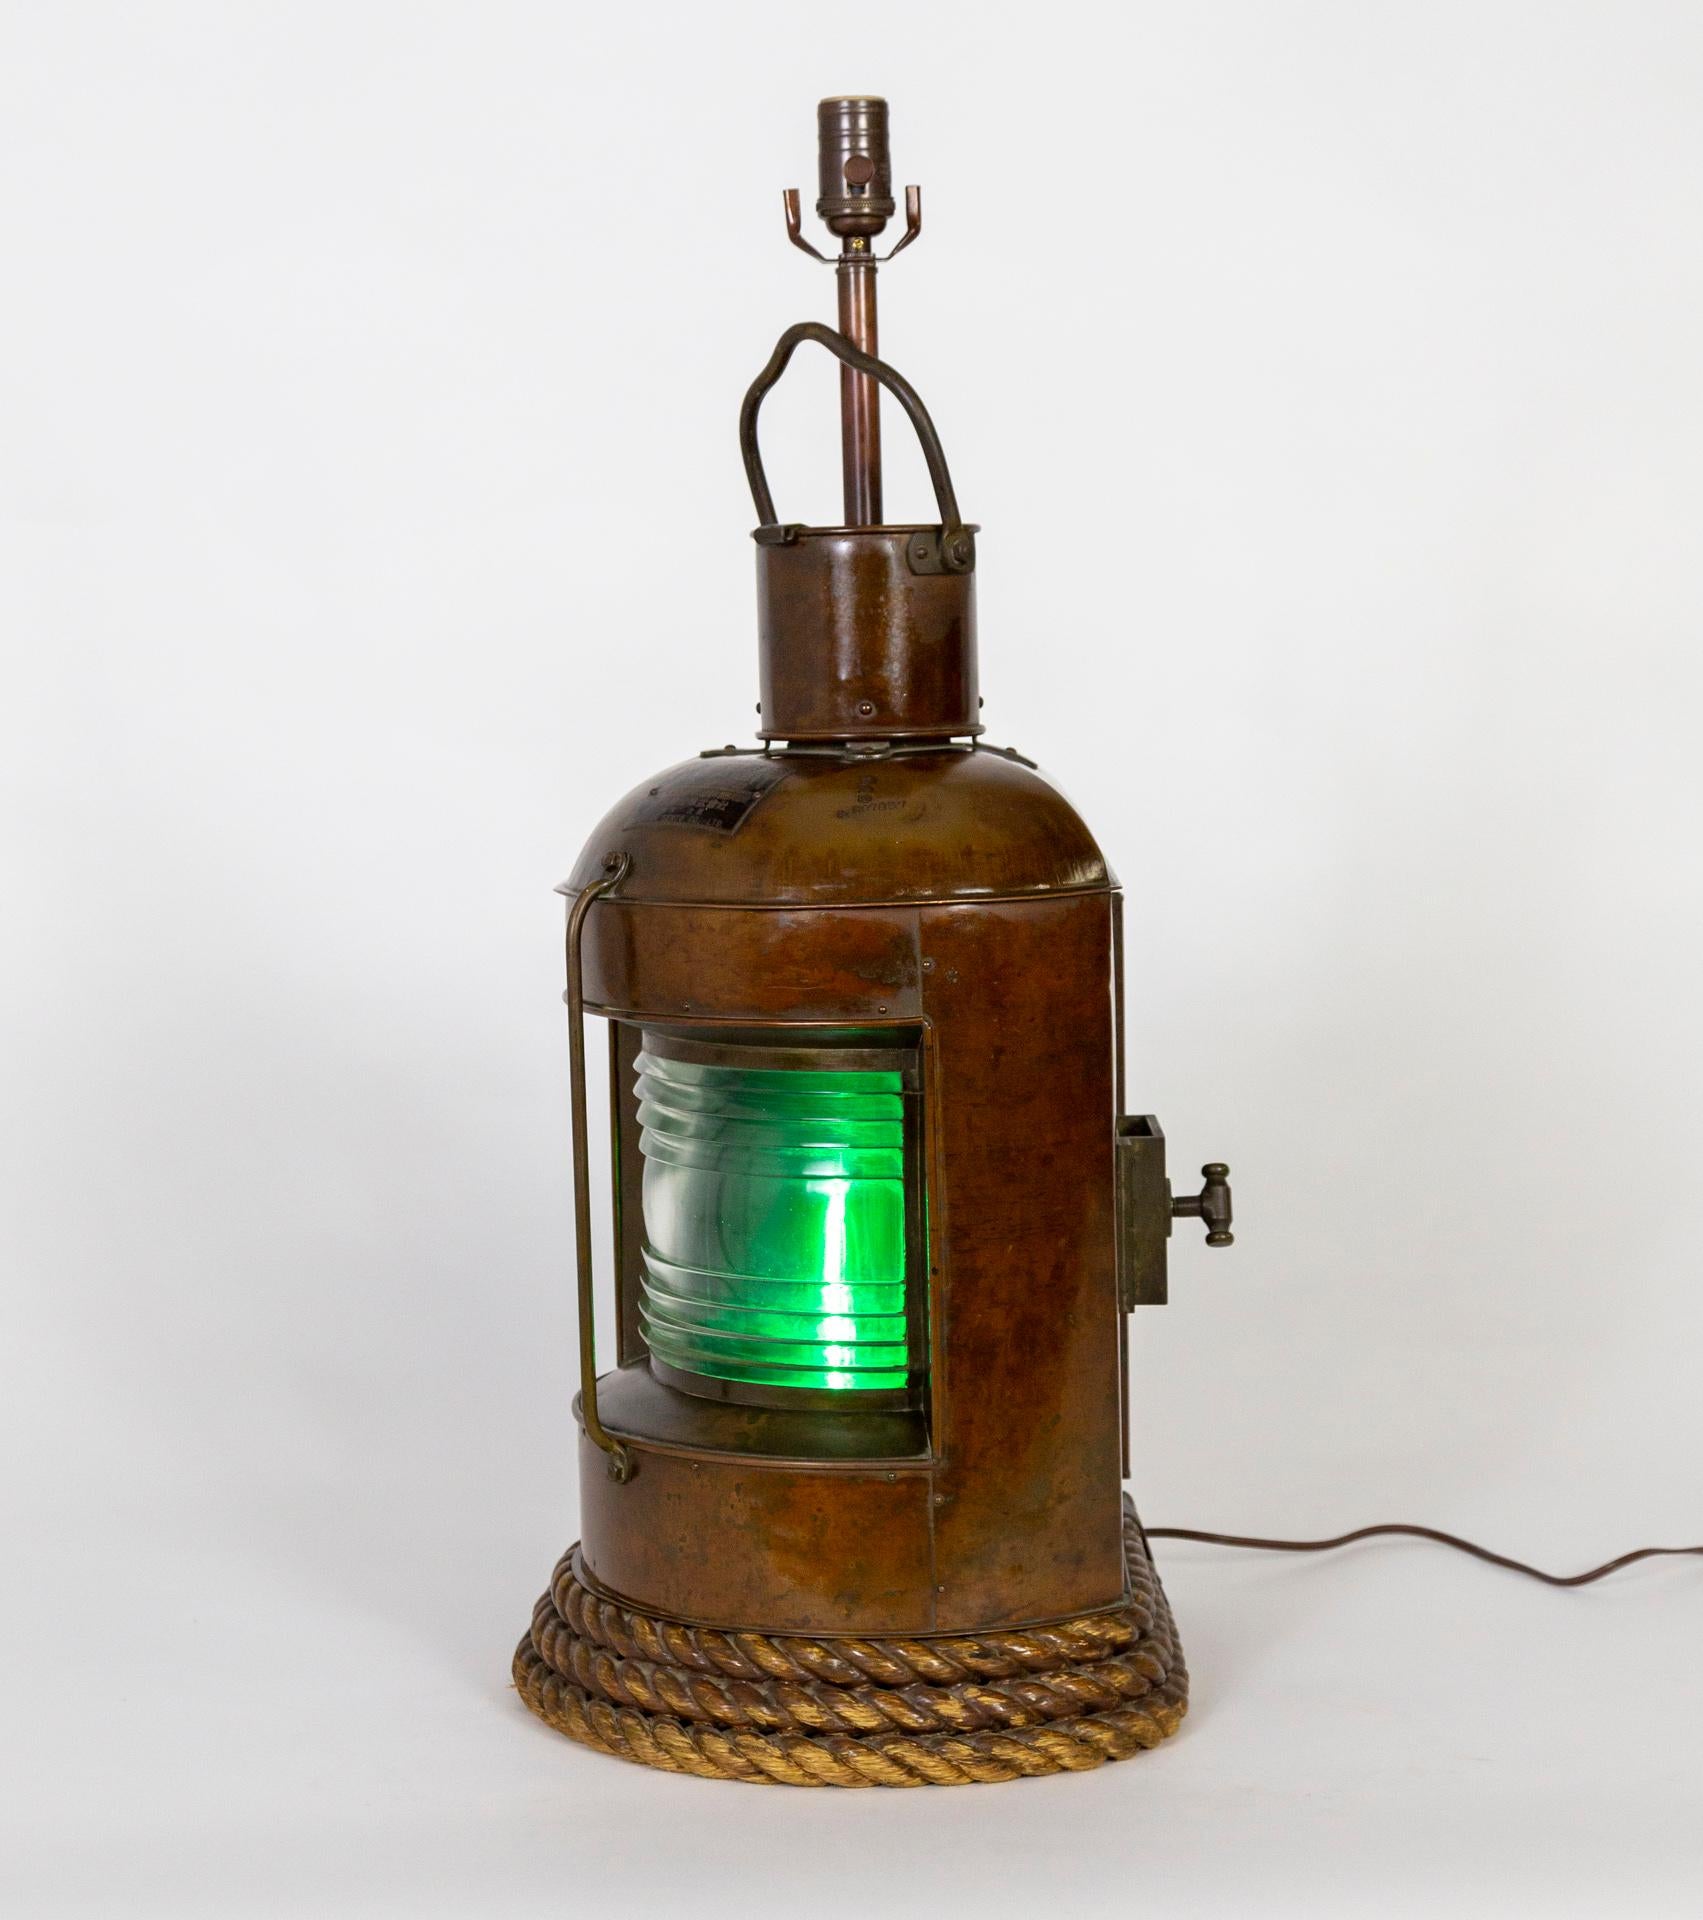 These lanterns were made in the early 20th century with excellent craftsmanship as ship lights for signaling and navigation.  They are newly made into table lamps with a stem and socket in a matching finish on top, and the original interior lights